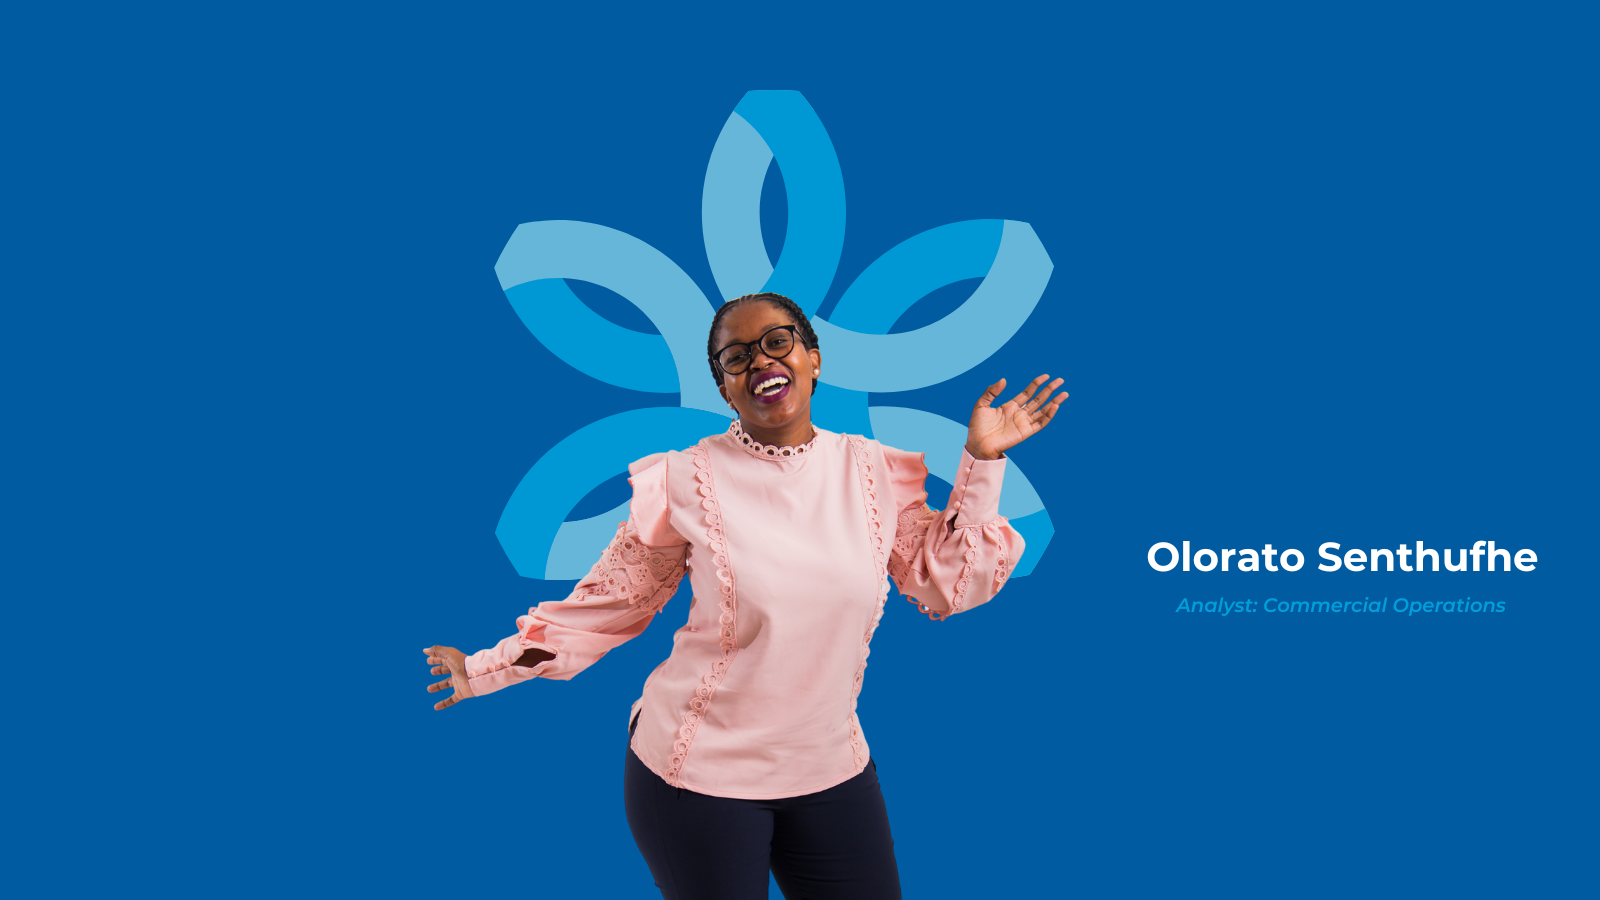 Olorato Senthufhe’s love for reading and research led her to Cellulant